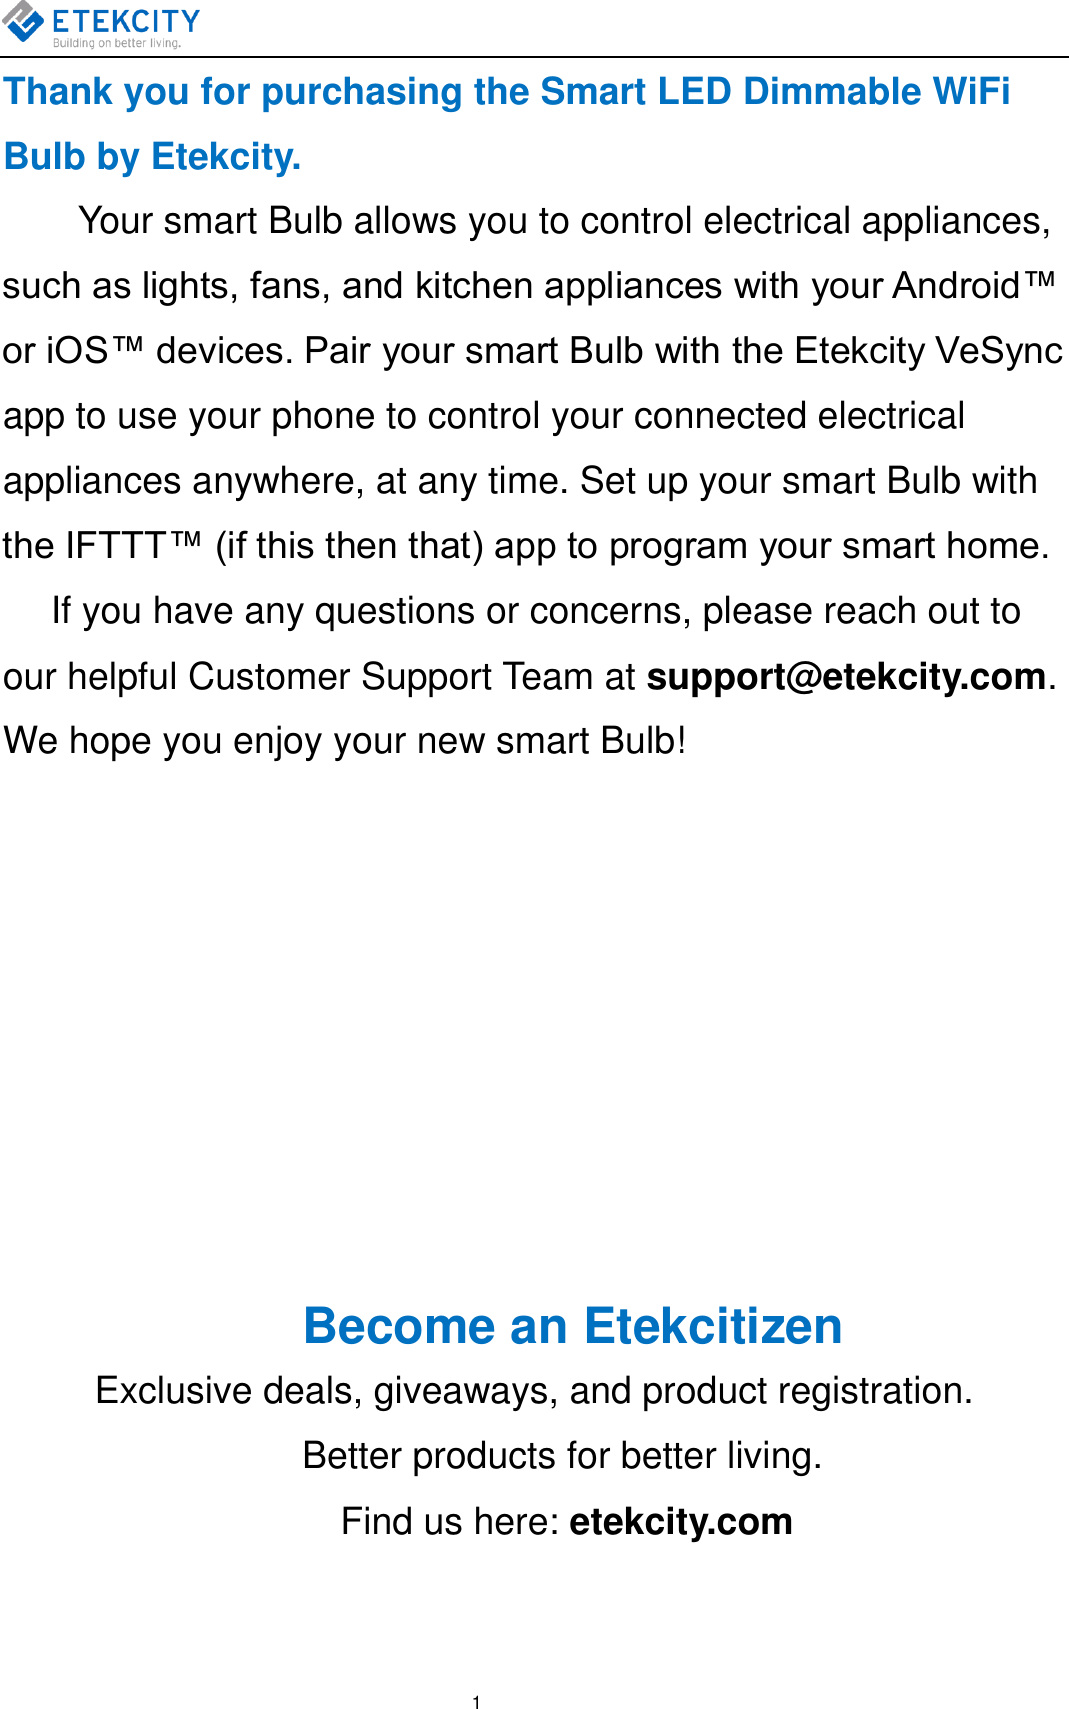    1 Thank you for purchasing the Smart LED Dimmable WiFi Bulb by Etekcity. Your smart Bulb allows you to control electrical appliances, such as lights, fans, and kitchen appliances with your Android™ or iOS™ devices. Pair your smart Bulb with the Etekcity VeSync app to use your phone to control your connected electrical appliances anywhere, at any time. Set up your smart Bulb with the IFTTT™ (if this then that) app to program your smart home.     If you have any questions or concerns, please reach out to our helpful Customer Support Team at support@etekcity.com. We hope you enjoy your new smart Bulb!                           Become an Etekcitizen Exclusive deals, giveaways, and product registration.      Better products for better living.   Find us here: etekcity.com  